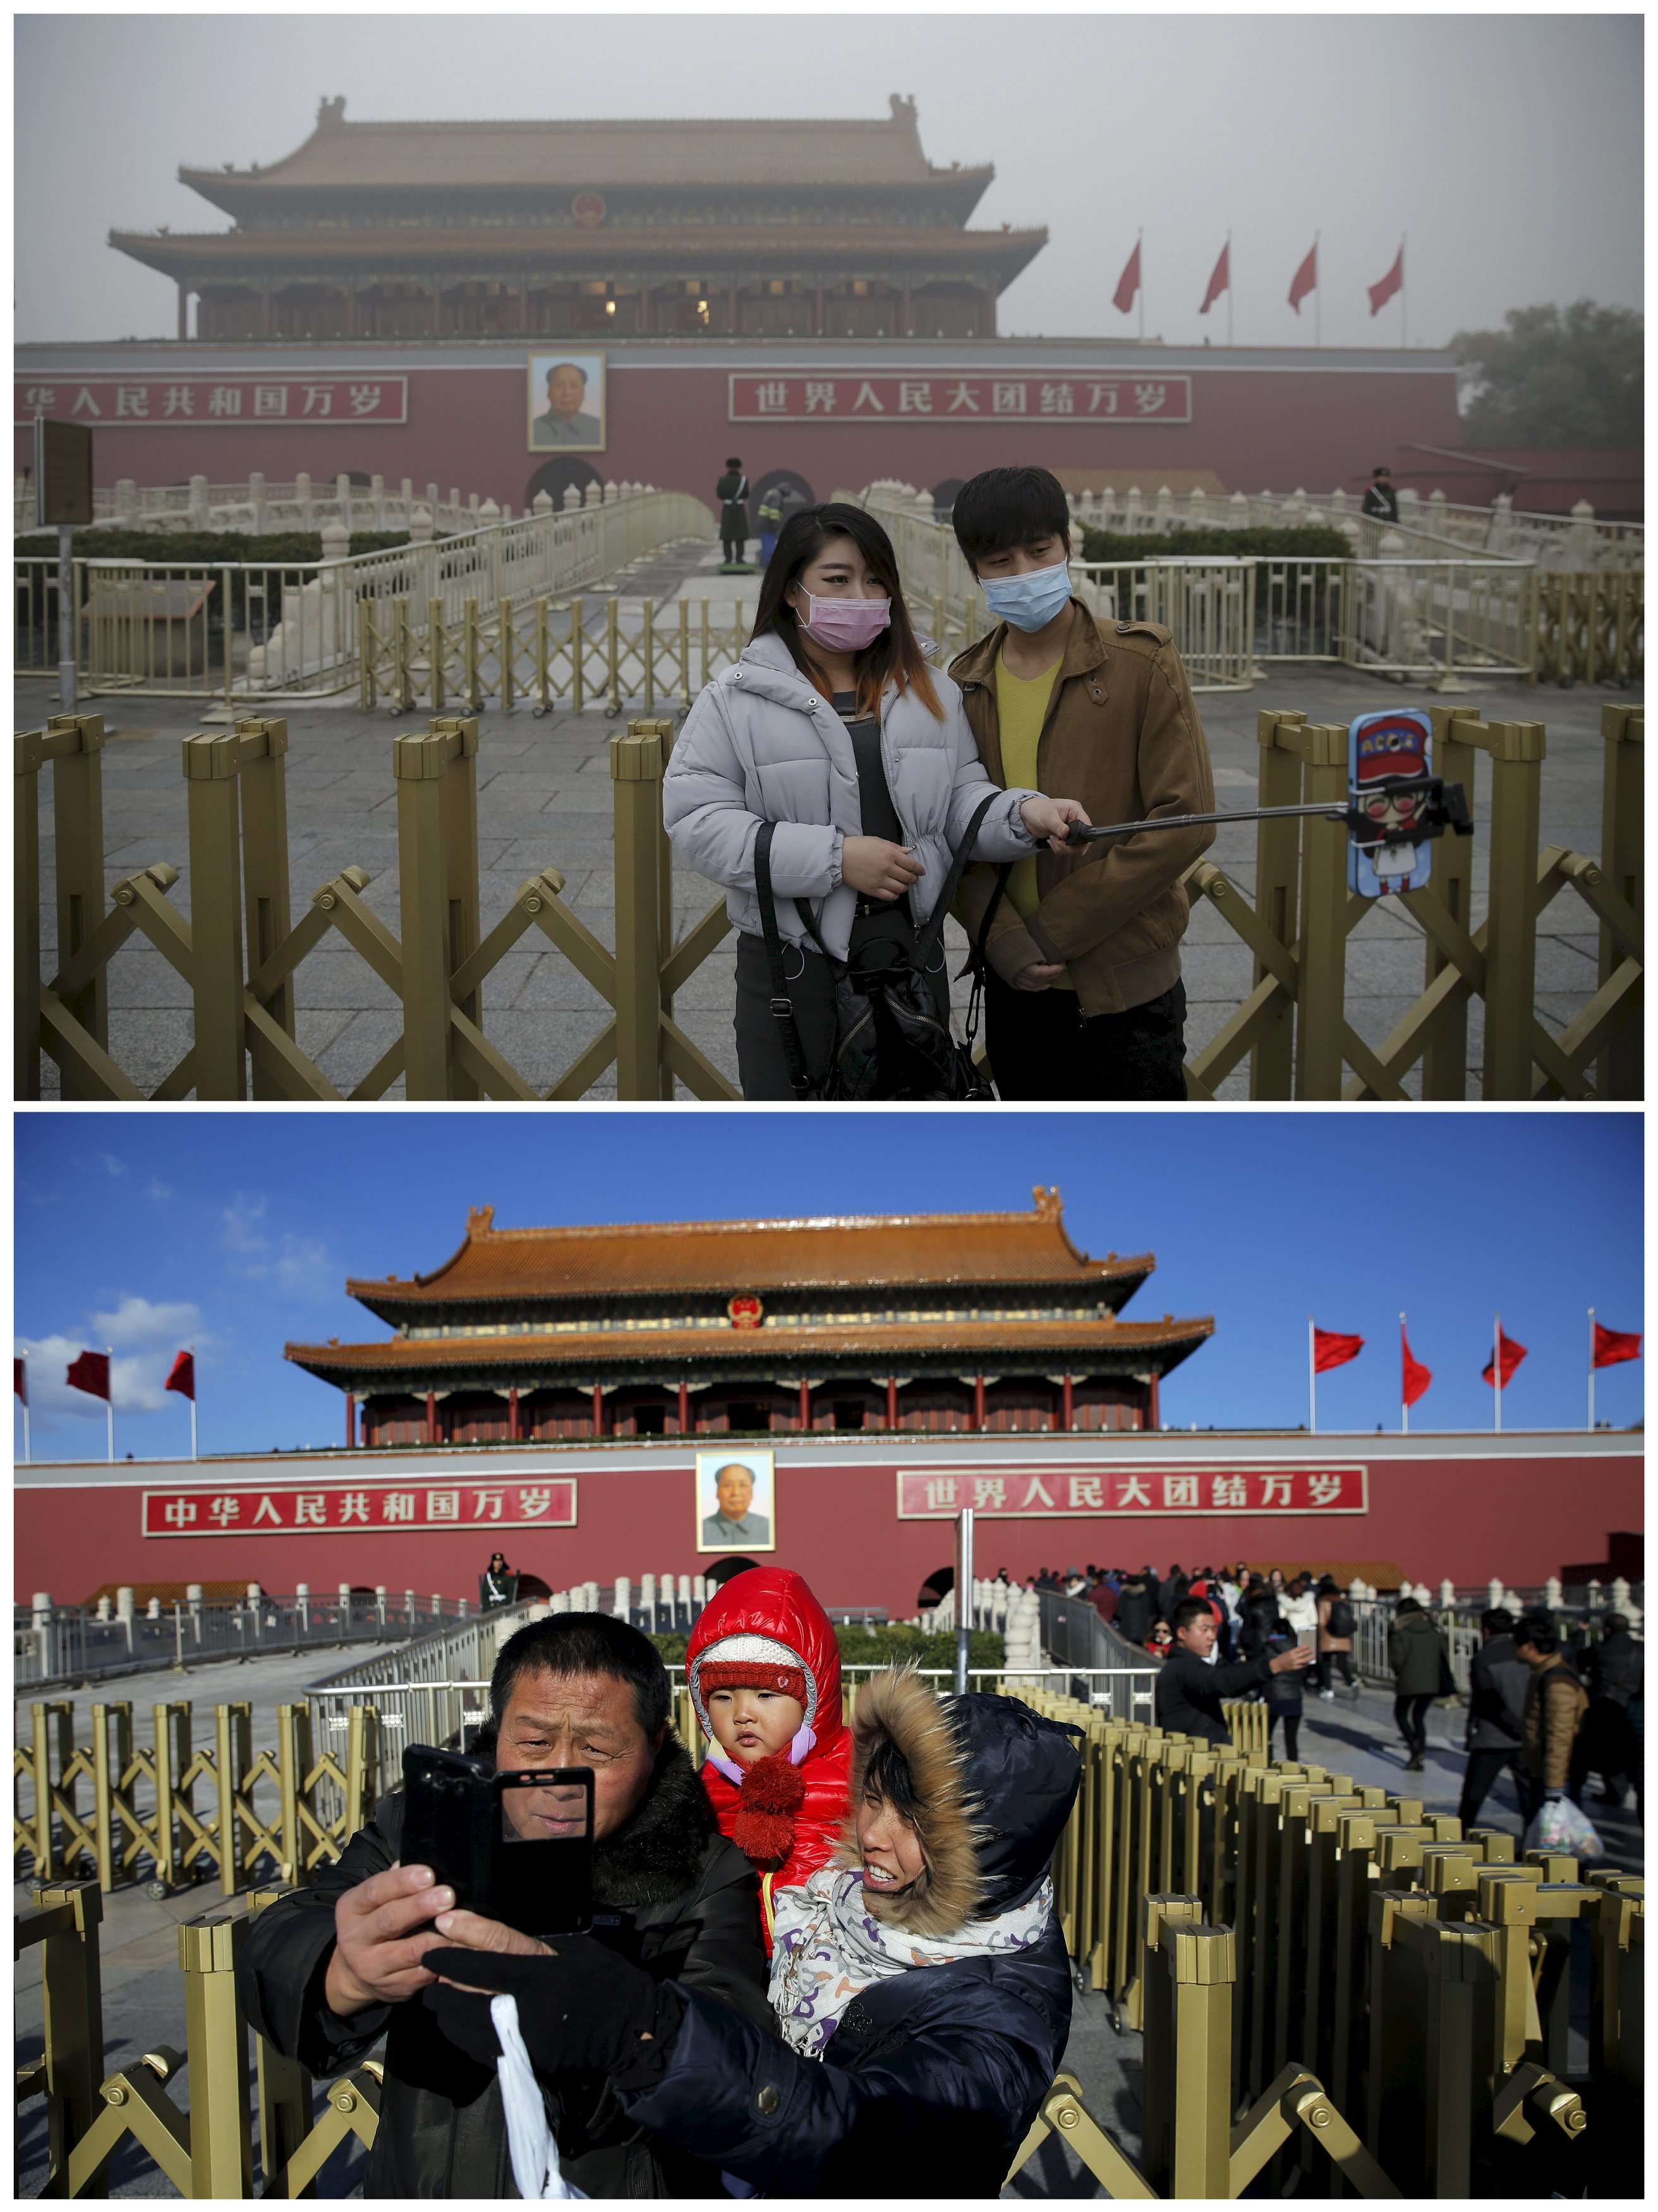 This photo combo shows visitors posing for photographs in front of the Tiananmen Gate and the giant portrait of Chinese late Chairman Mao Zedong on a smoggy day and a sunny day.